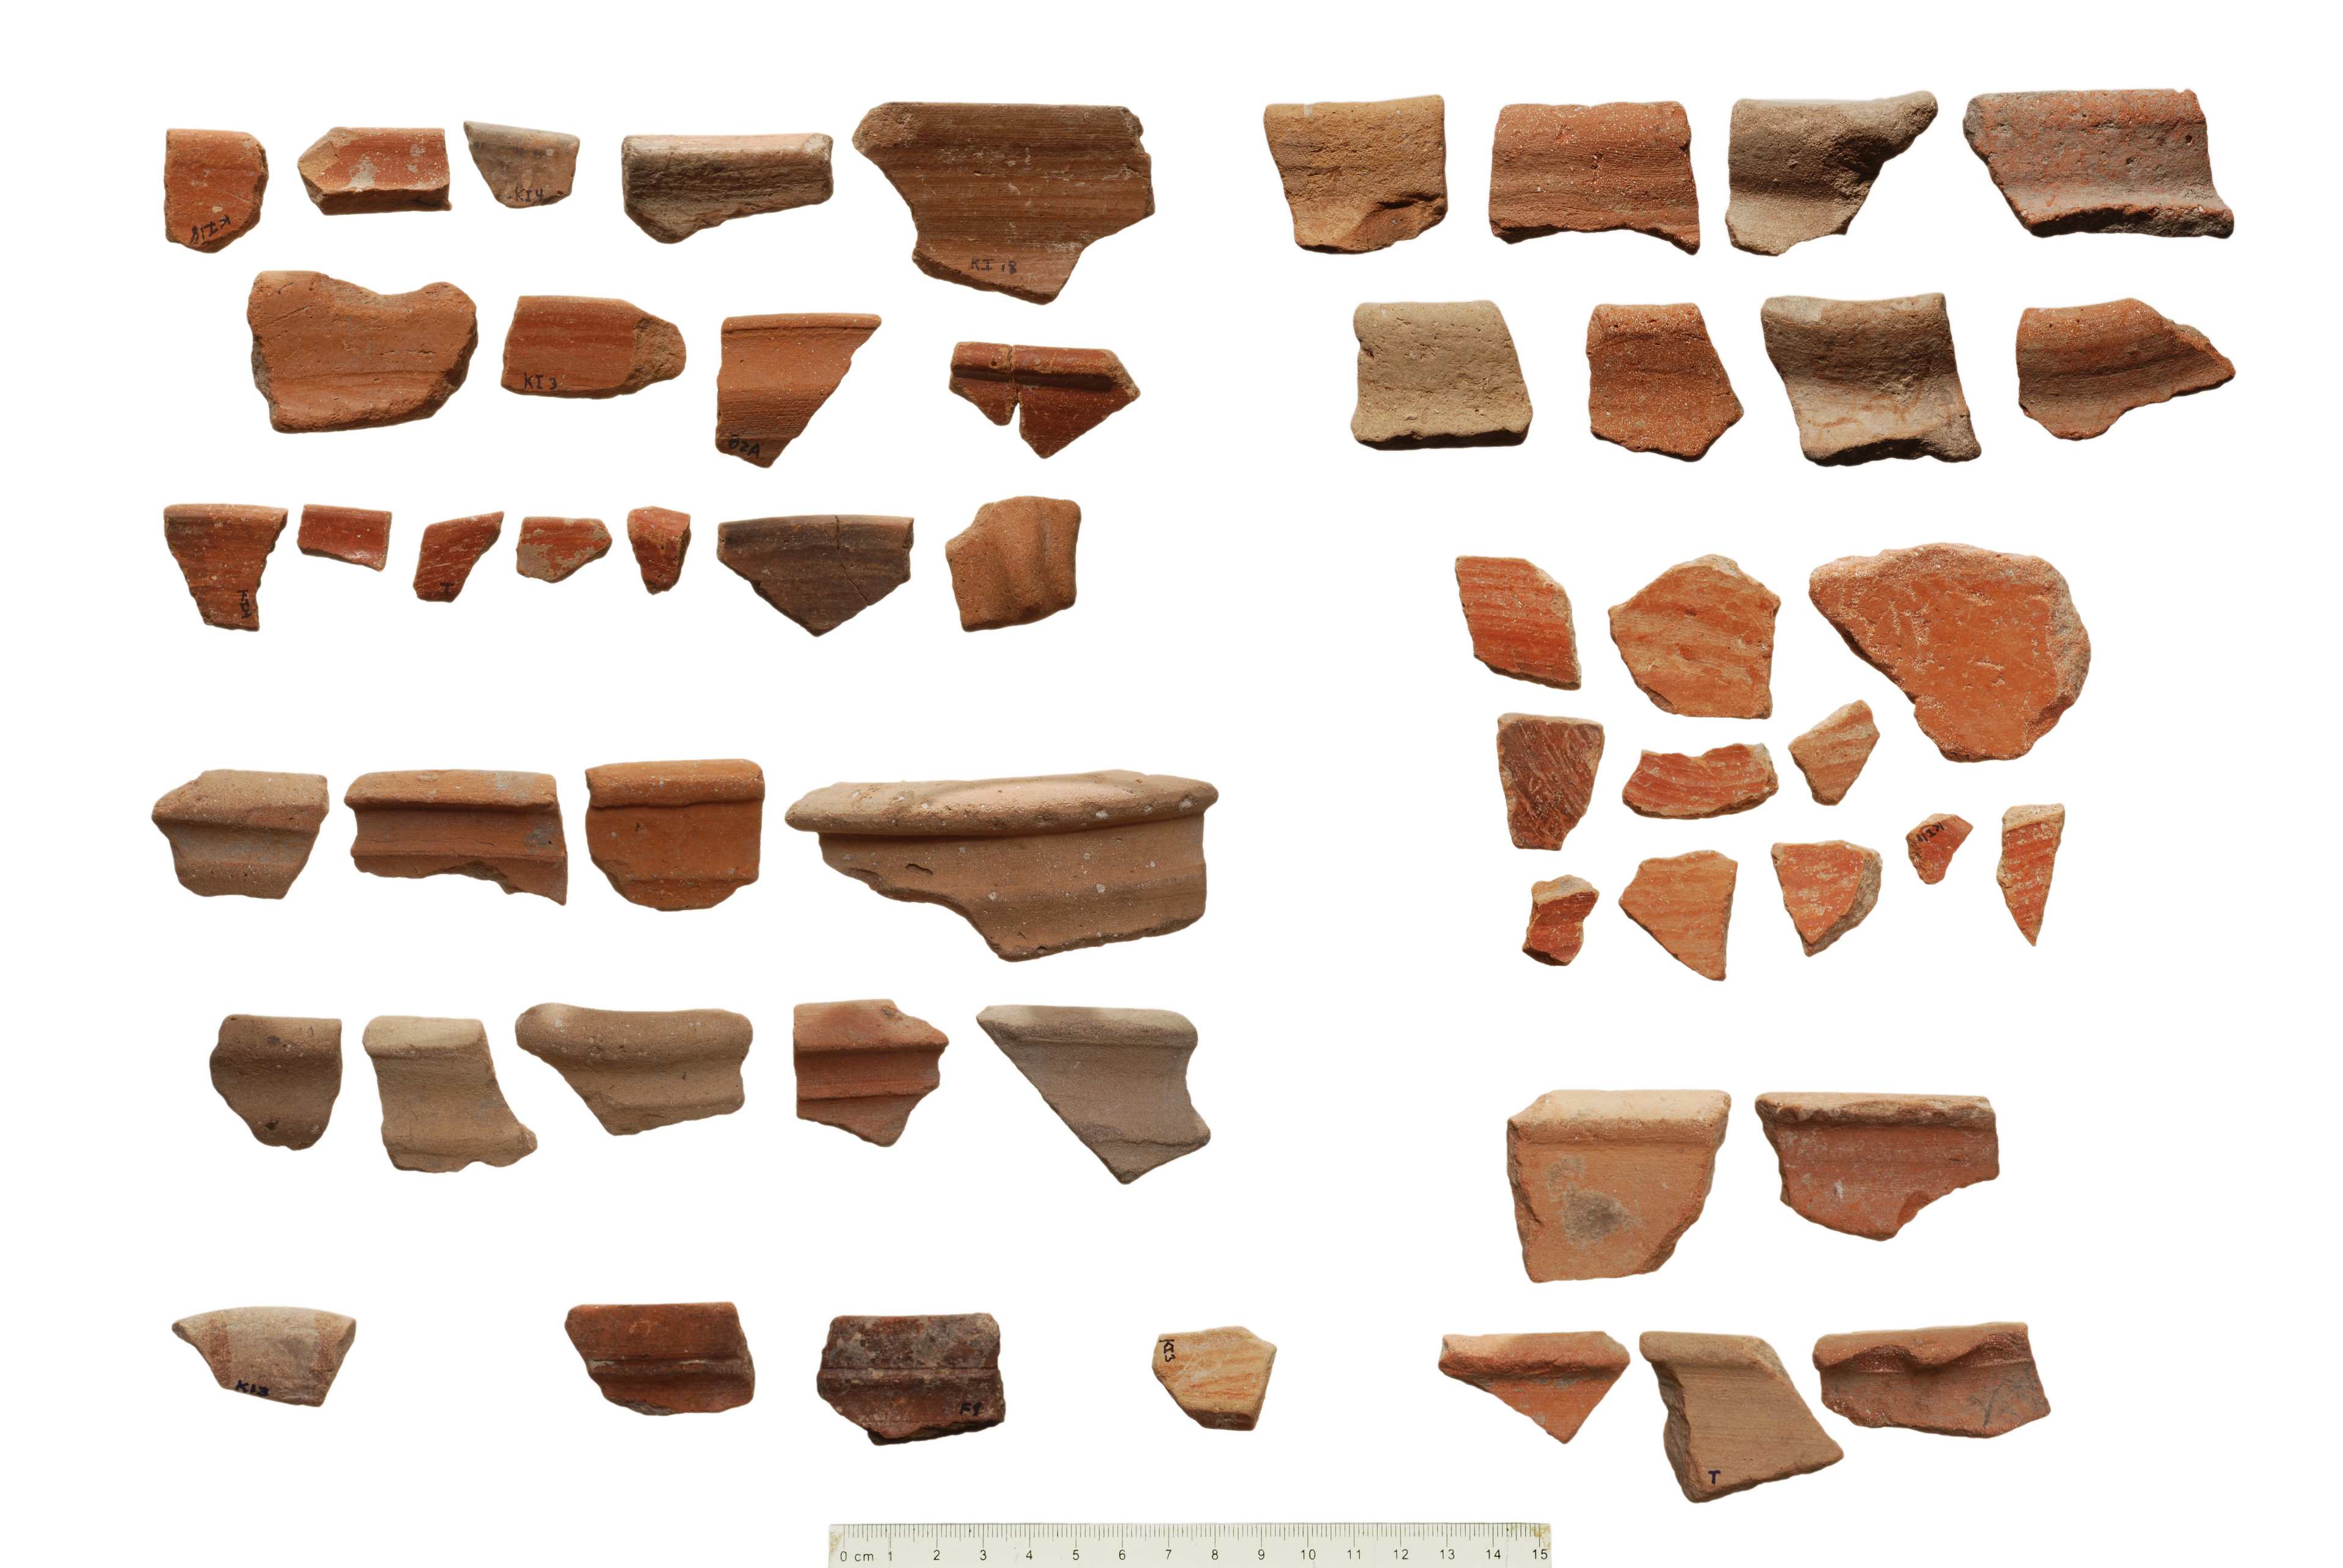 Pottery Shards Dates to the Iron Age IIA (10th-9th century BCE) 